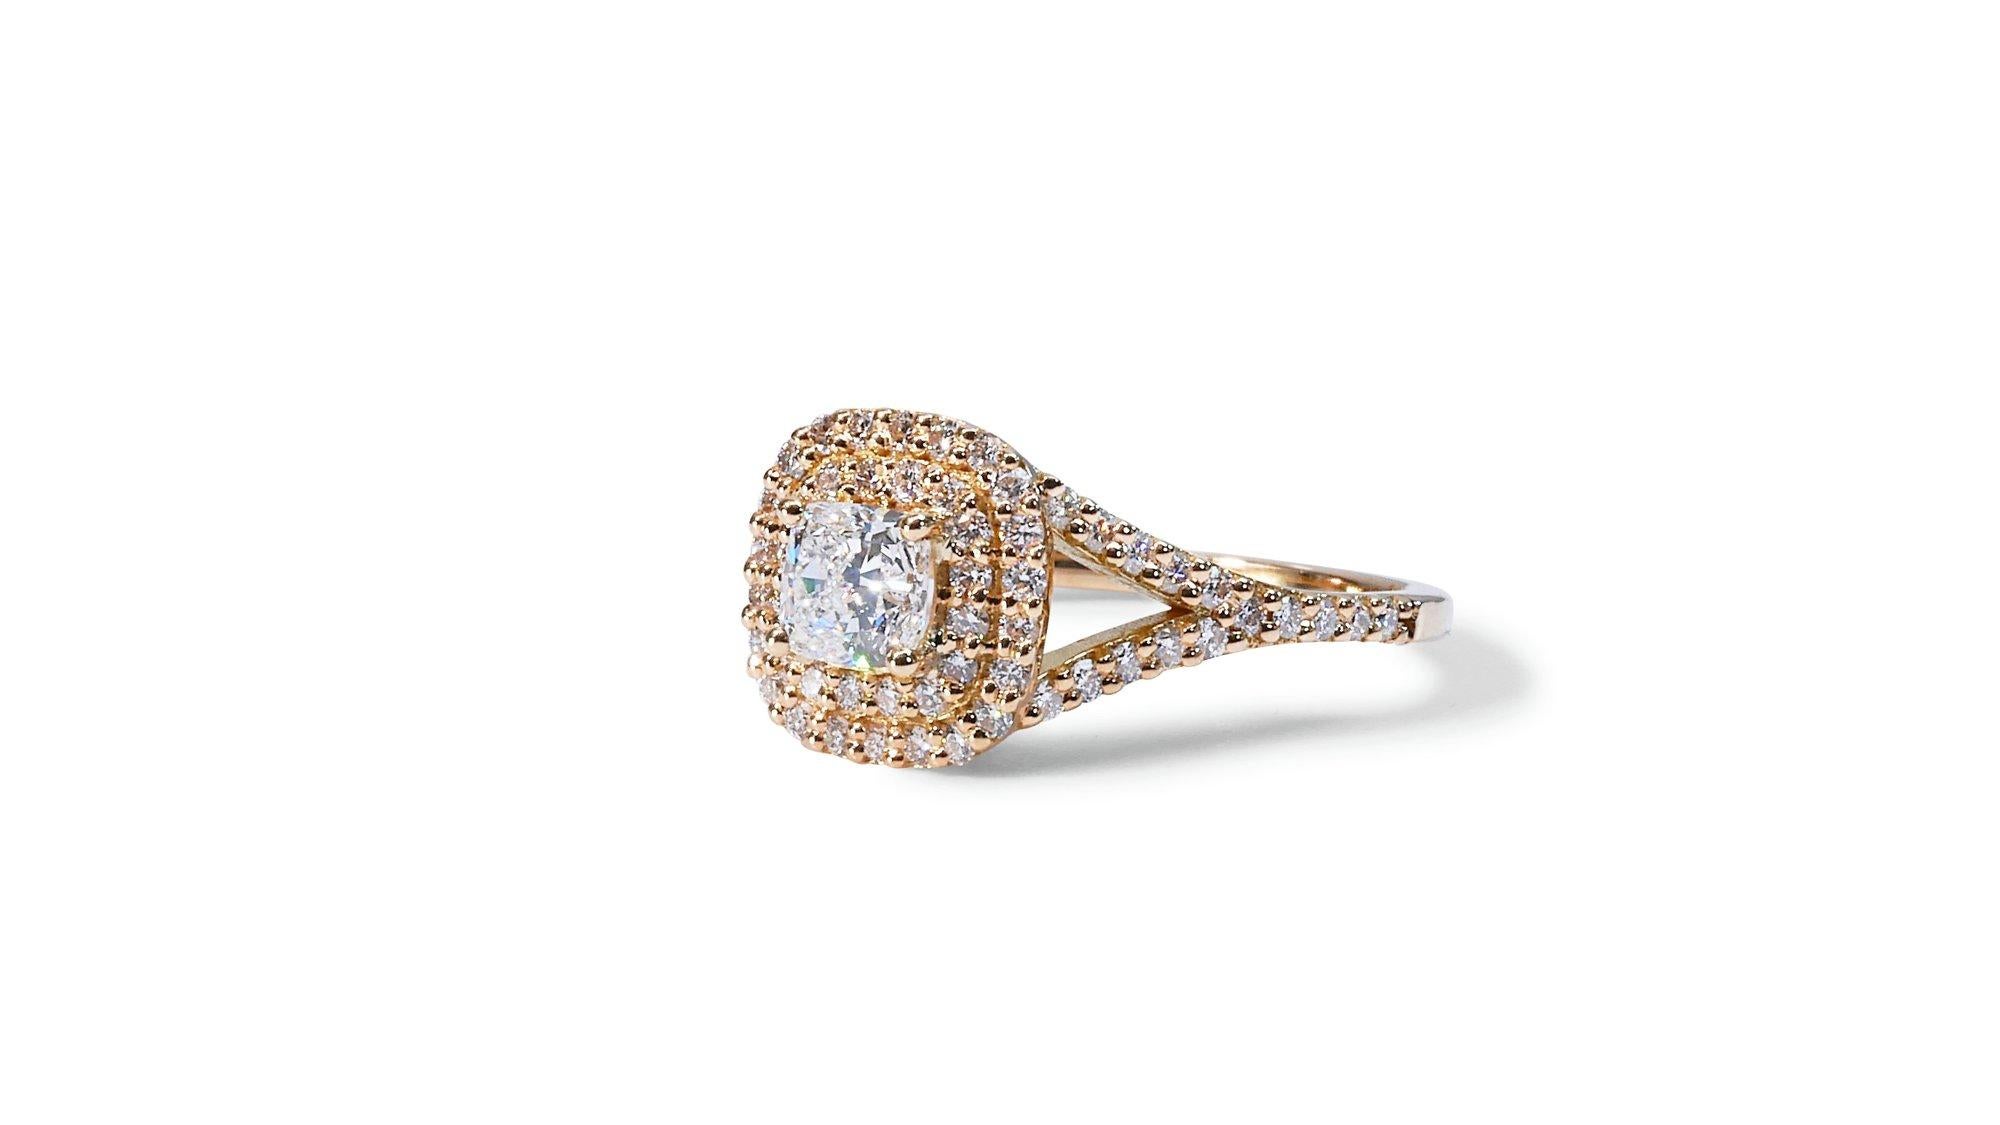 Sparkling 18k Yellow Gold Natural Diamond Double Halo Ring w/1.25 ct - GIA Certified

This sparkling double-halo diamond ring is a captivating symbol of enduring love and timeless style. A mesmerizing 0.90-carat cushion-cut diamond as its